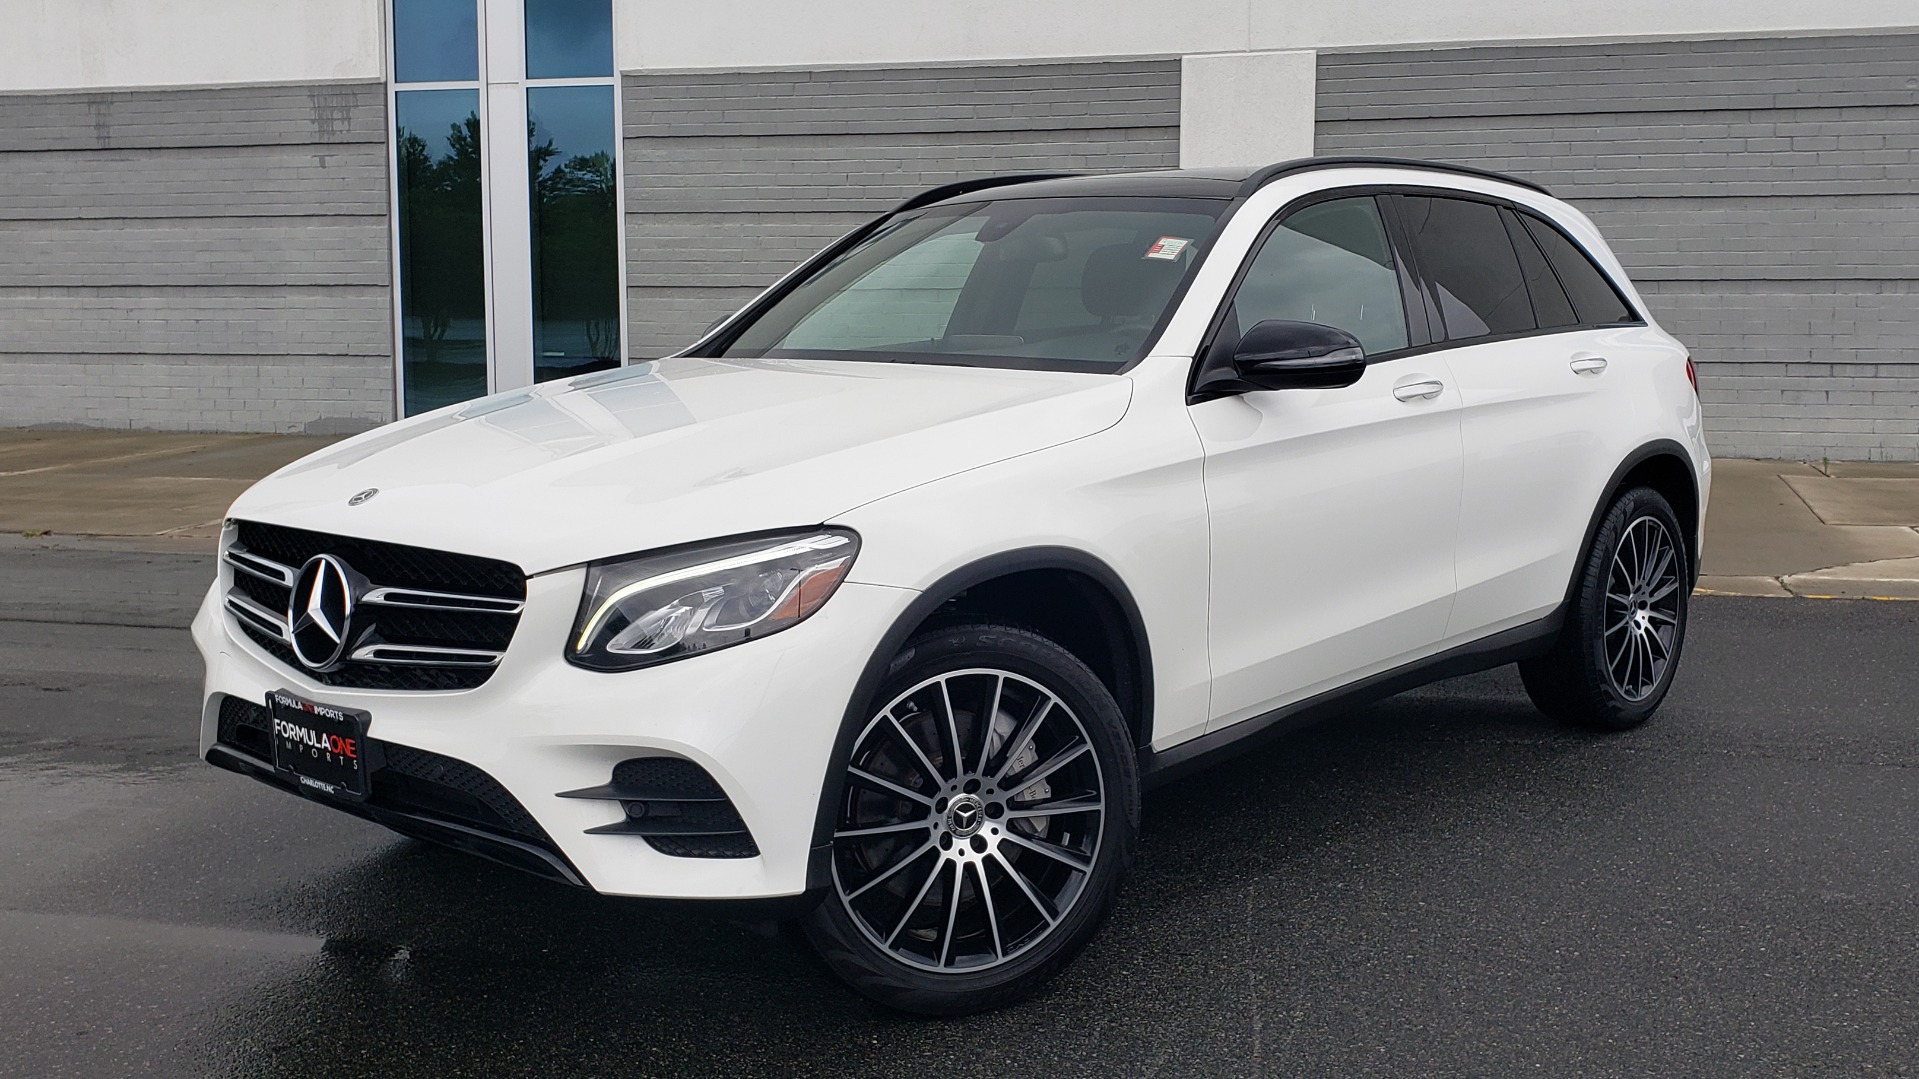 Used 2018 Mercedes-Benz GLC 300 4MATIC PREMIUM / NAV / BURMESTER SND / PANO-ROOF / REARVIEW for sale Sold at Formula Imports in Charlotte NC 28227 1